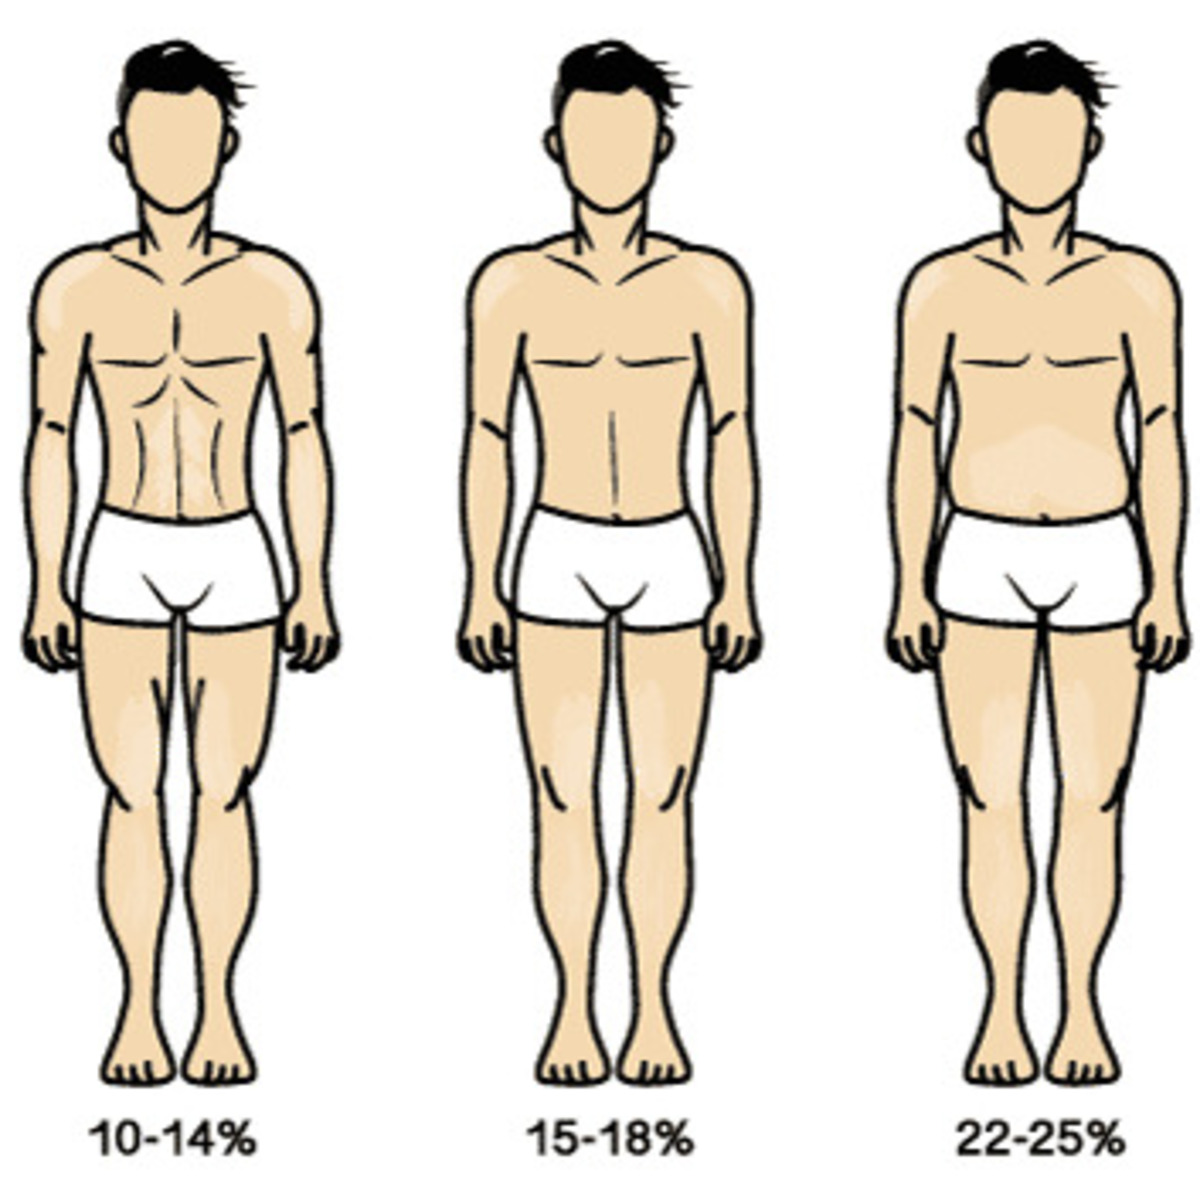 Circumference Measurements Body Fat Percentage Calculator Female Younger -  Katch Mcardle